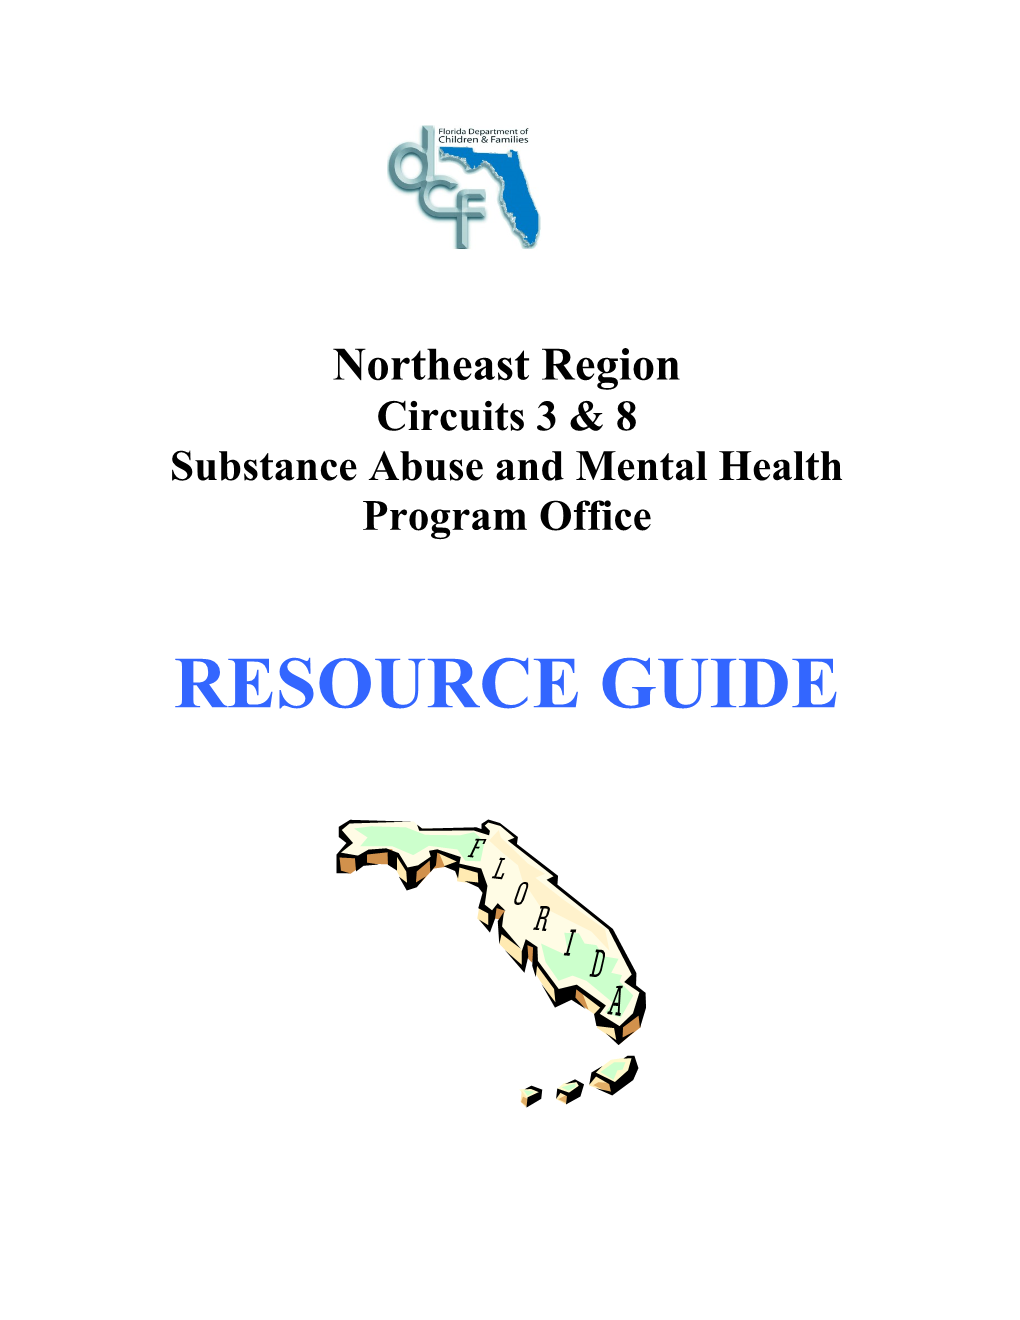 Substance Abuse and Mental Health Program Office